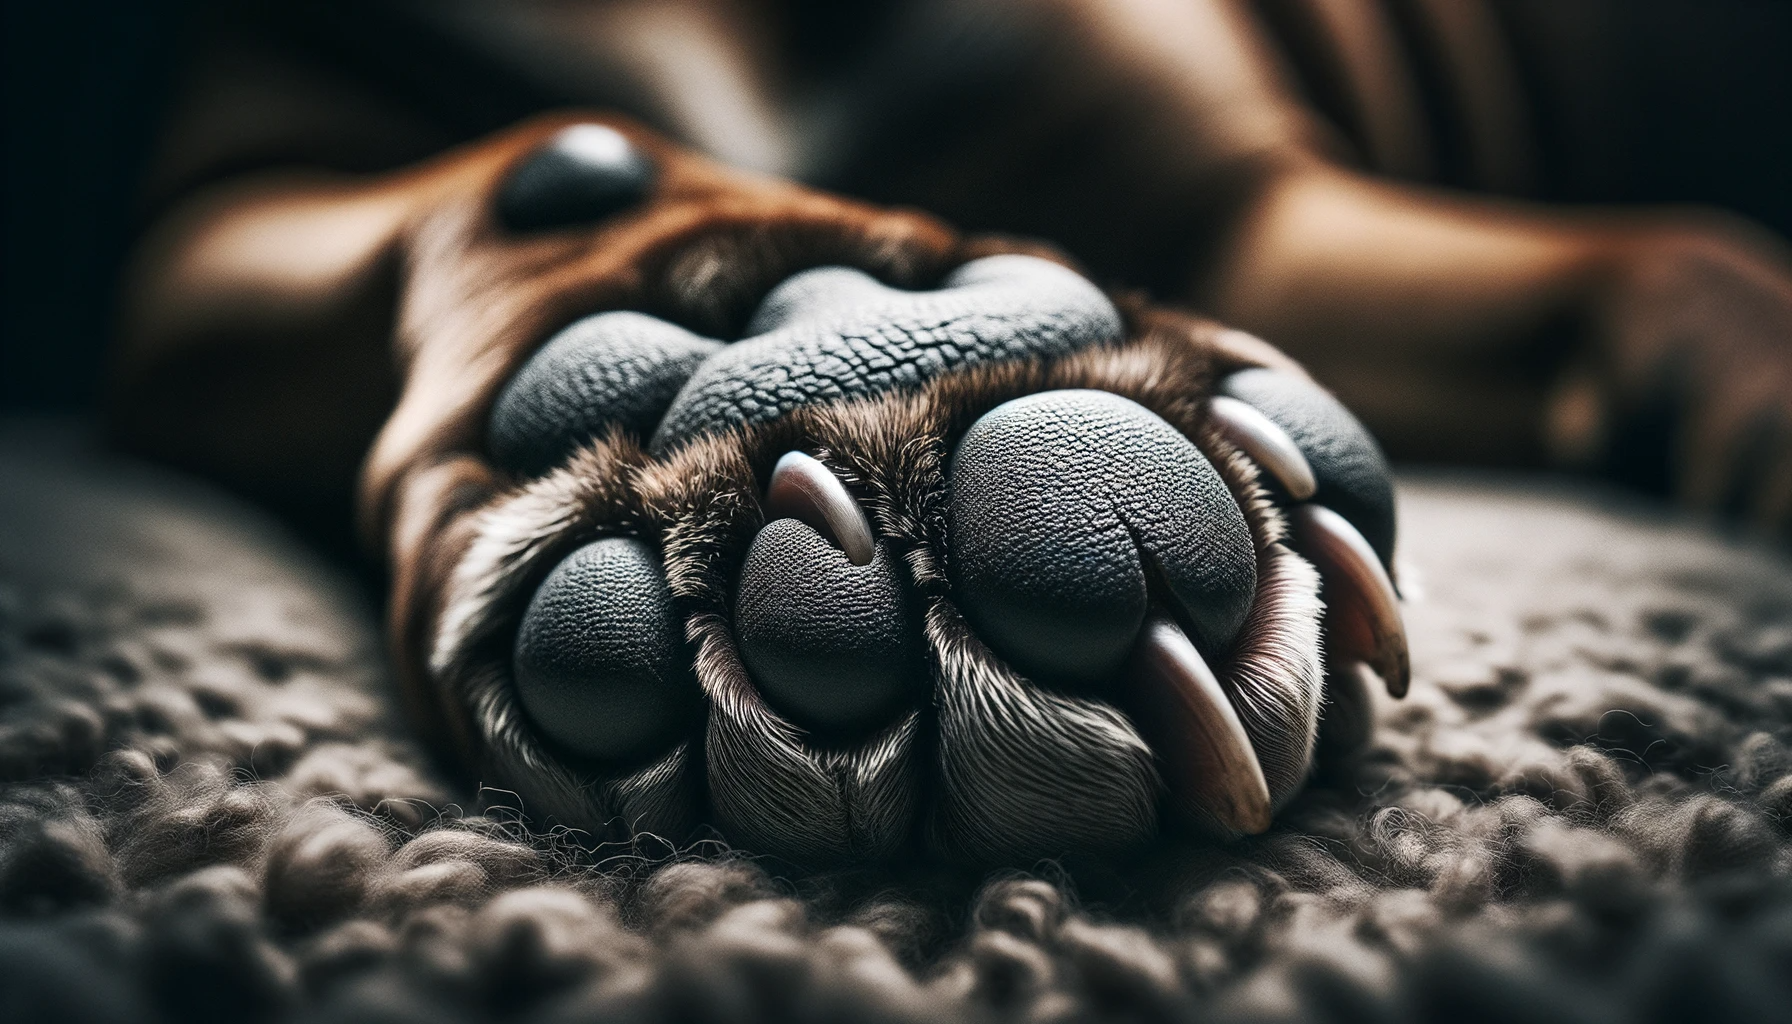 A close-up shot of a Bullador’s textured paw—showing strength and robustness.